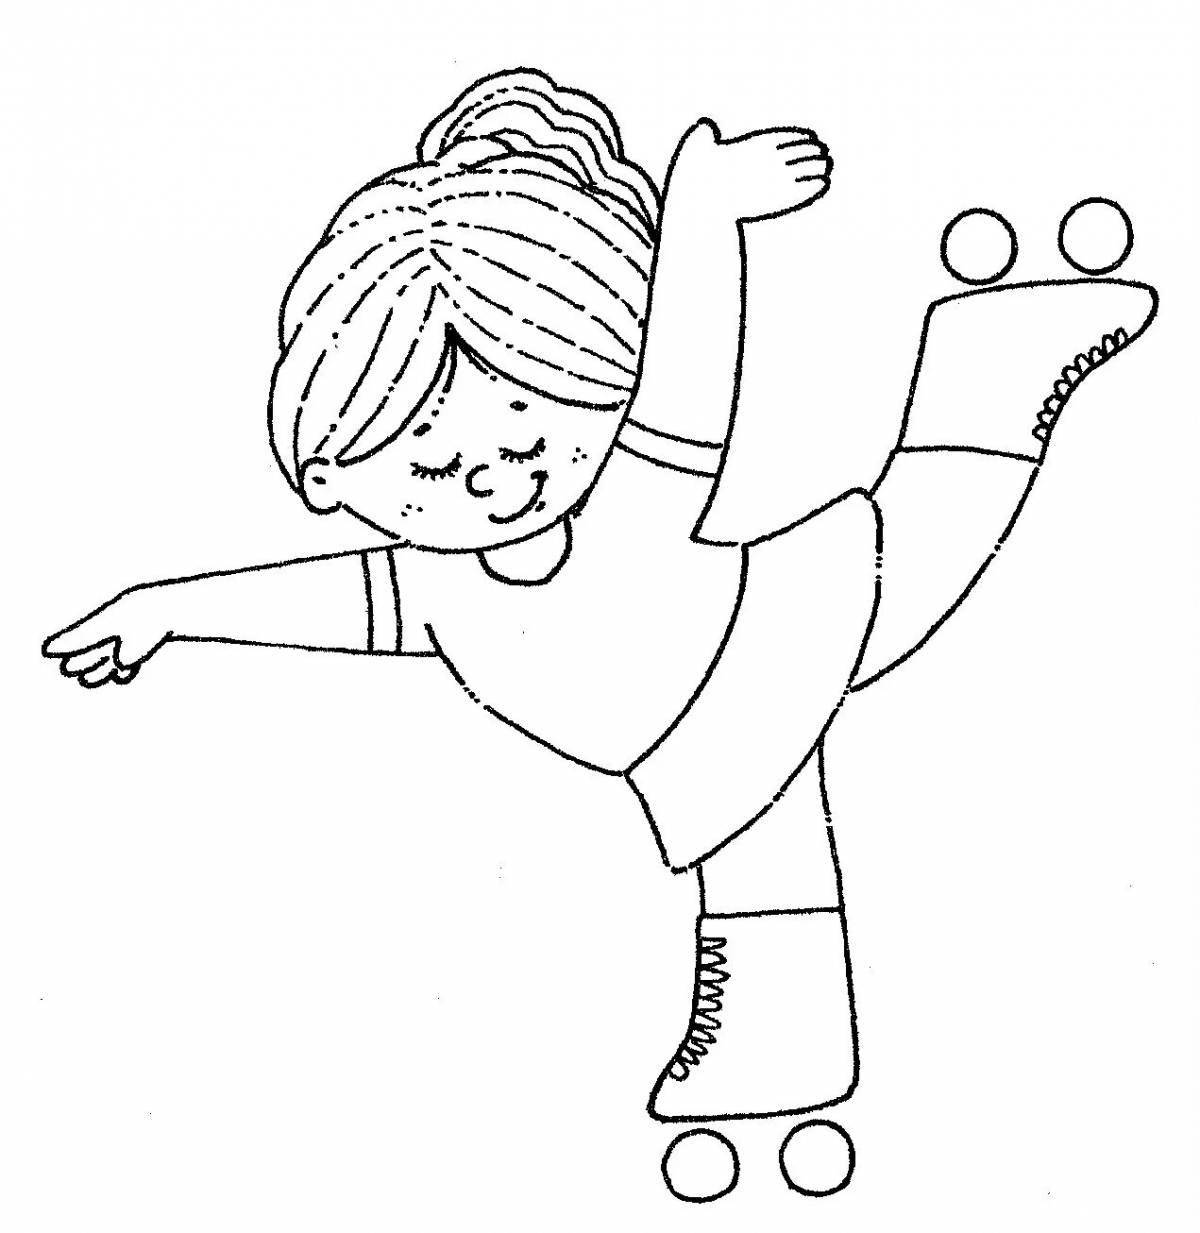 Thin acrobat coloring page